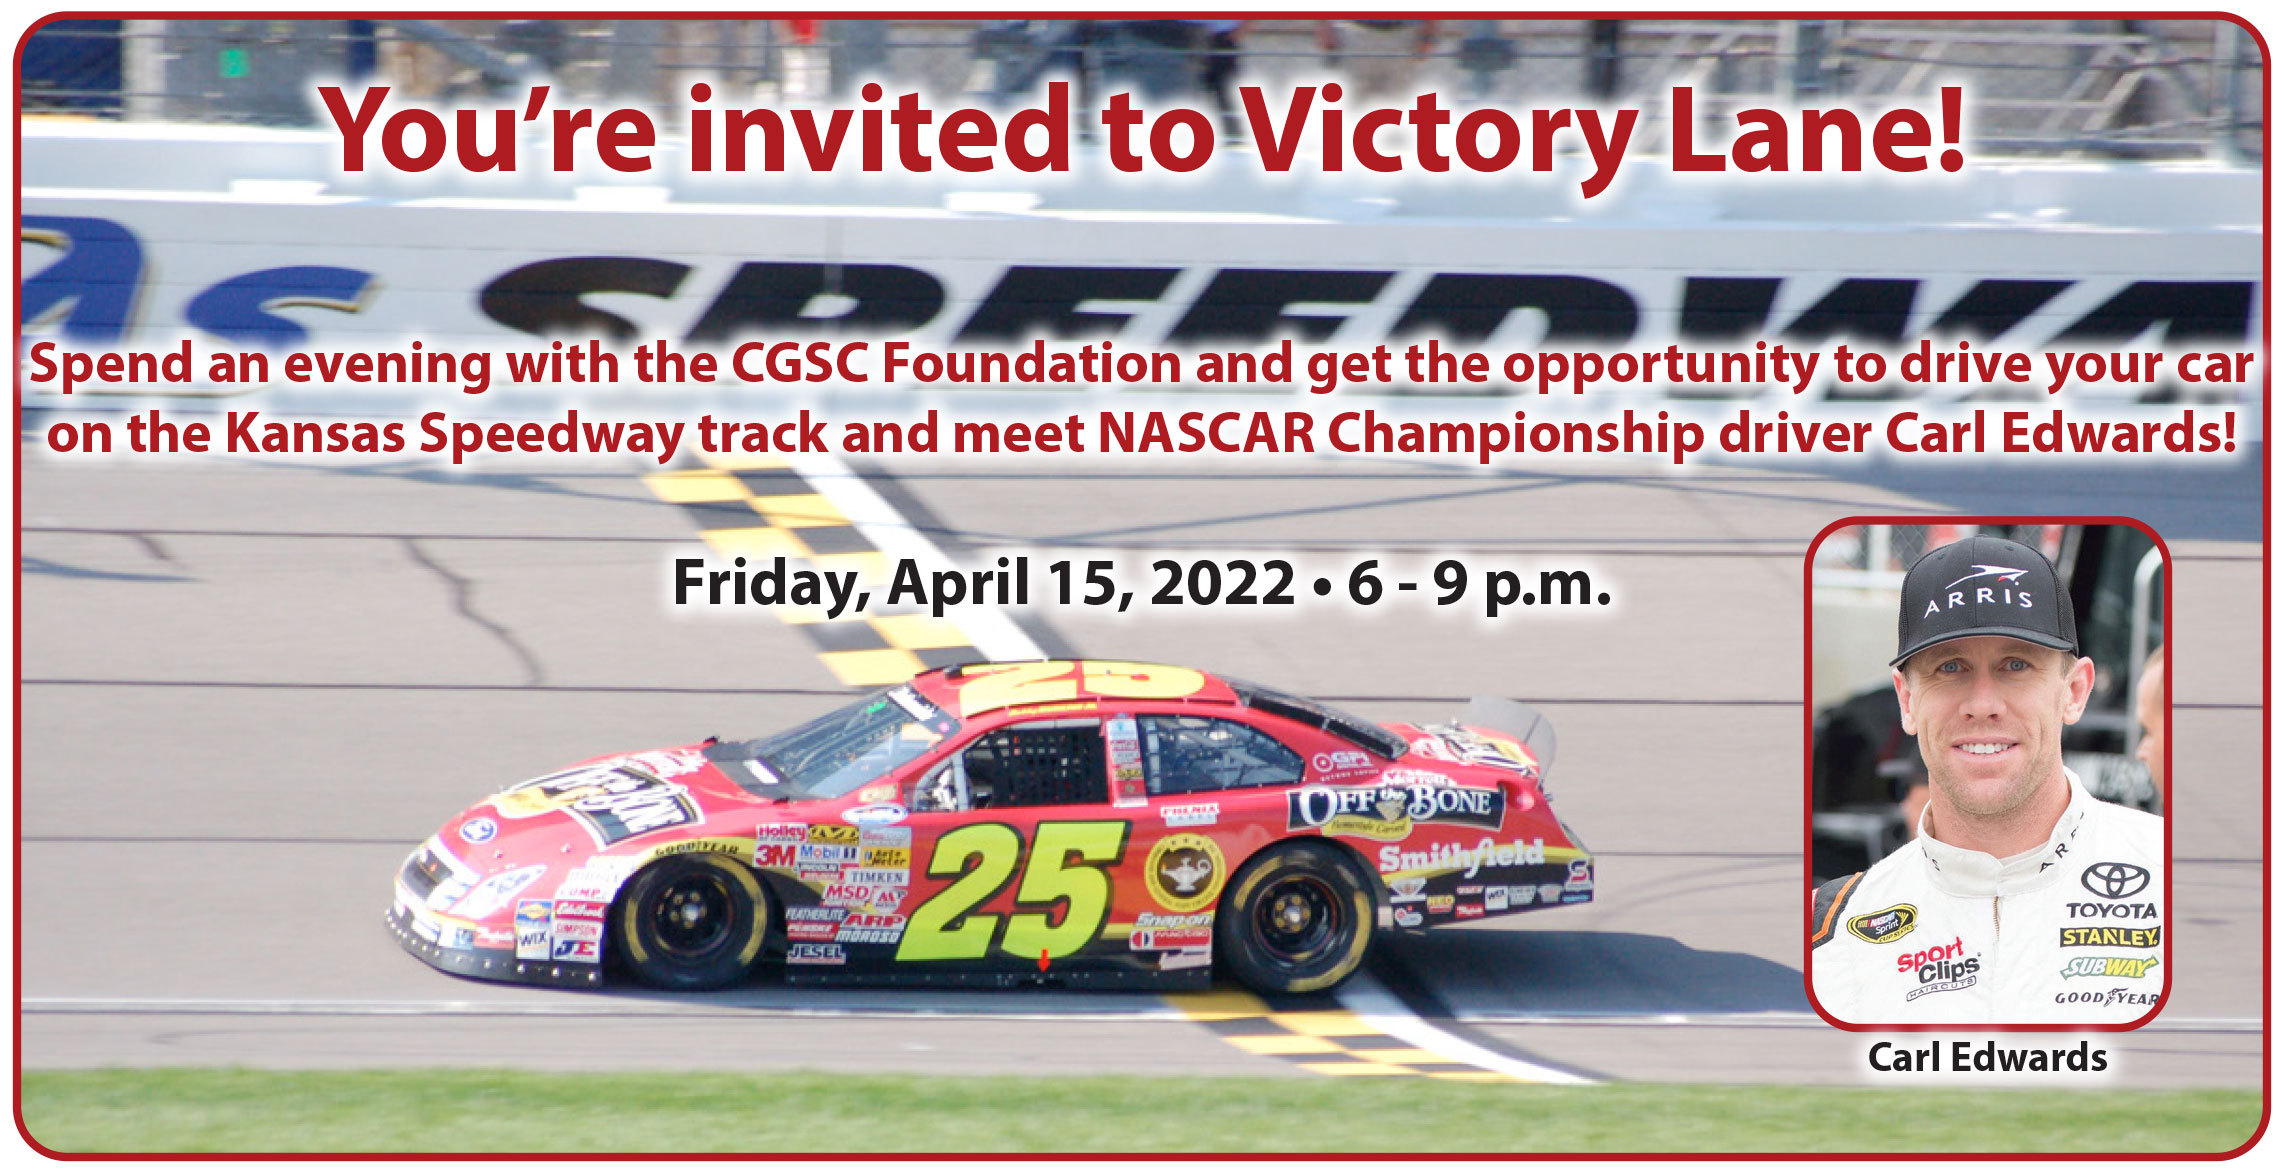 background is a photo of a NASCAR race car on the Kansas Speedway track. Over the photo background is the text inviting the public to spend the evening with the Foundation and get the opportunity to drive on the track and meet Carl Edwards.